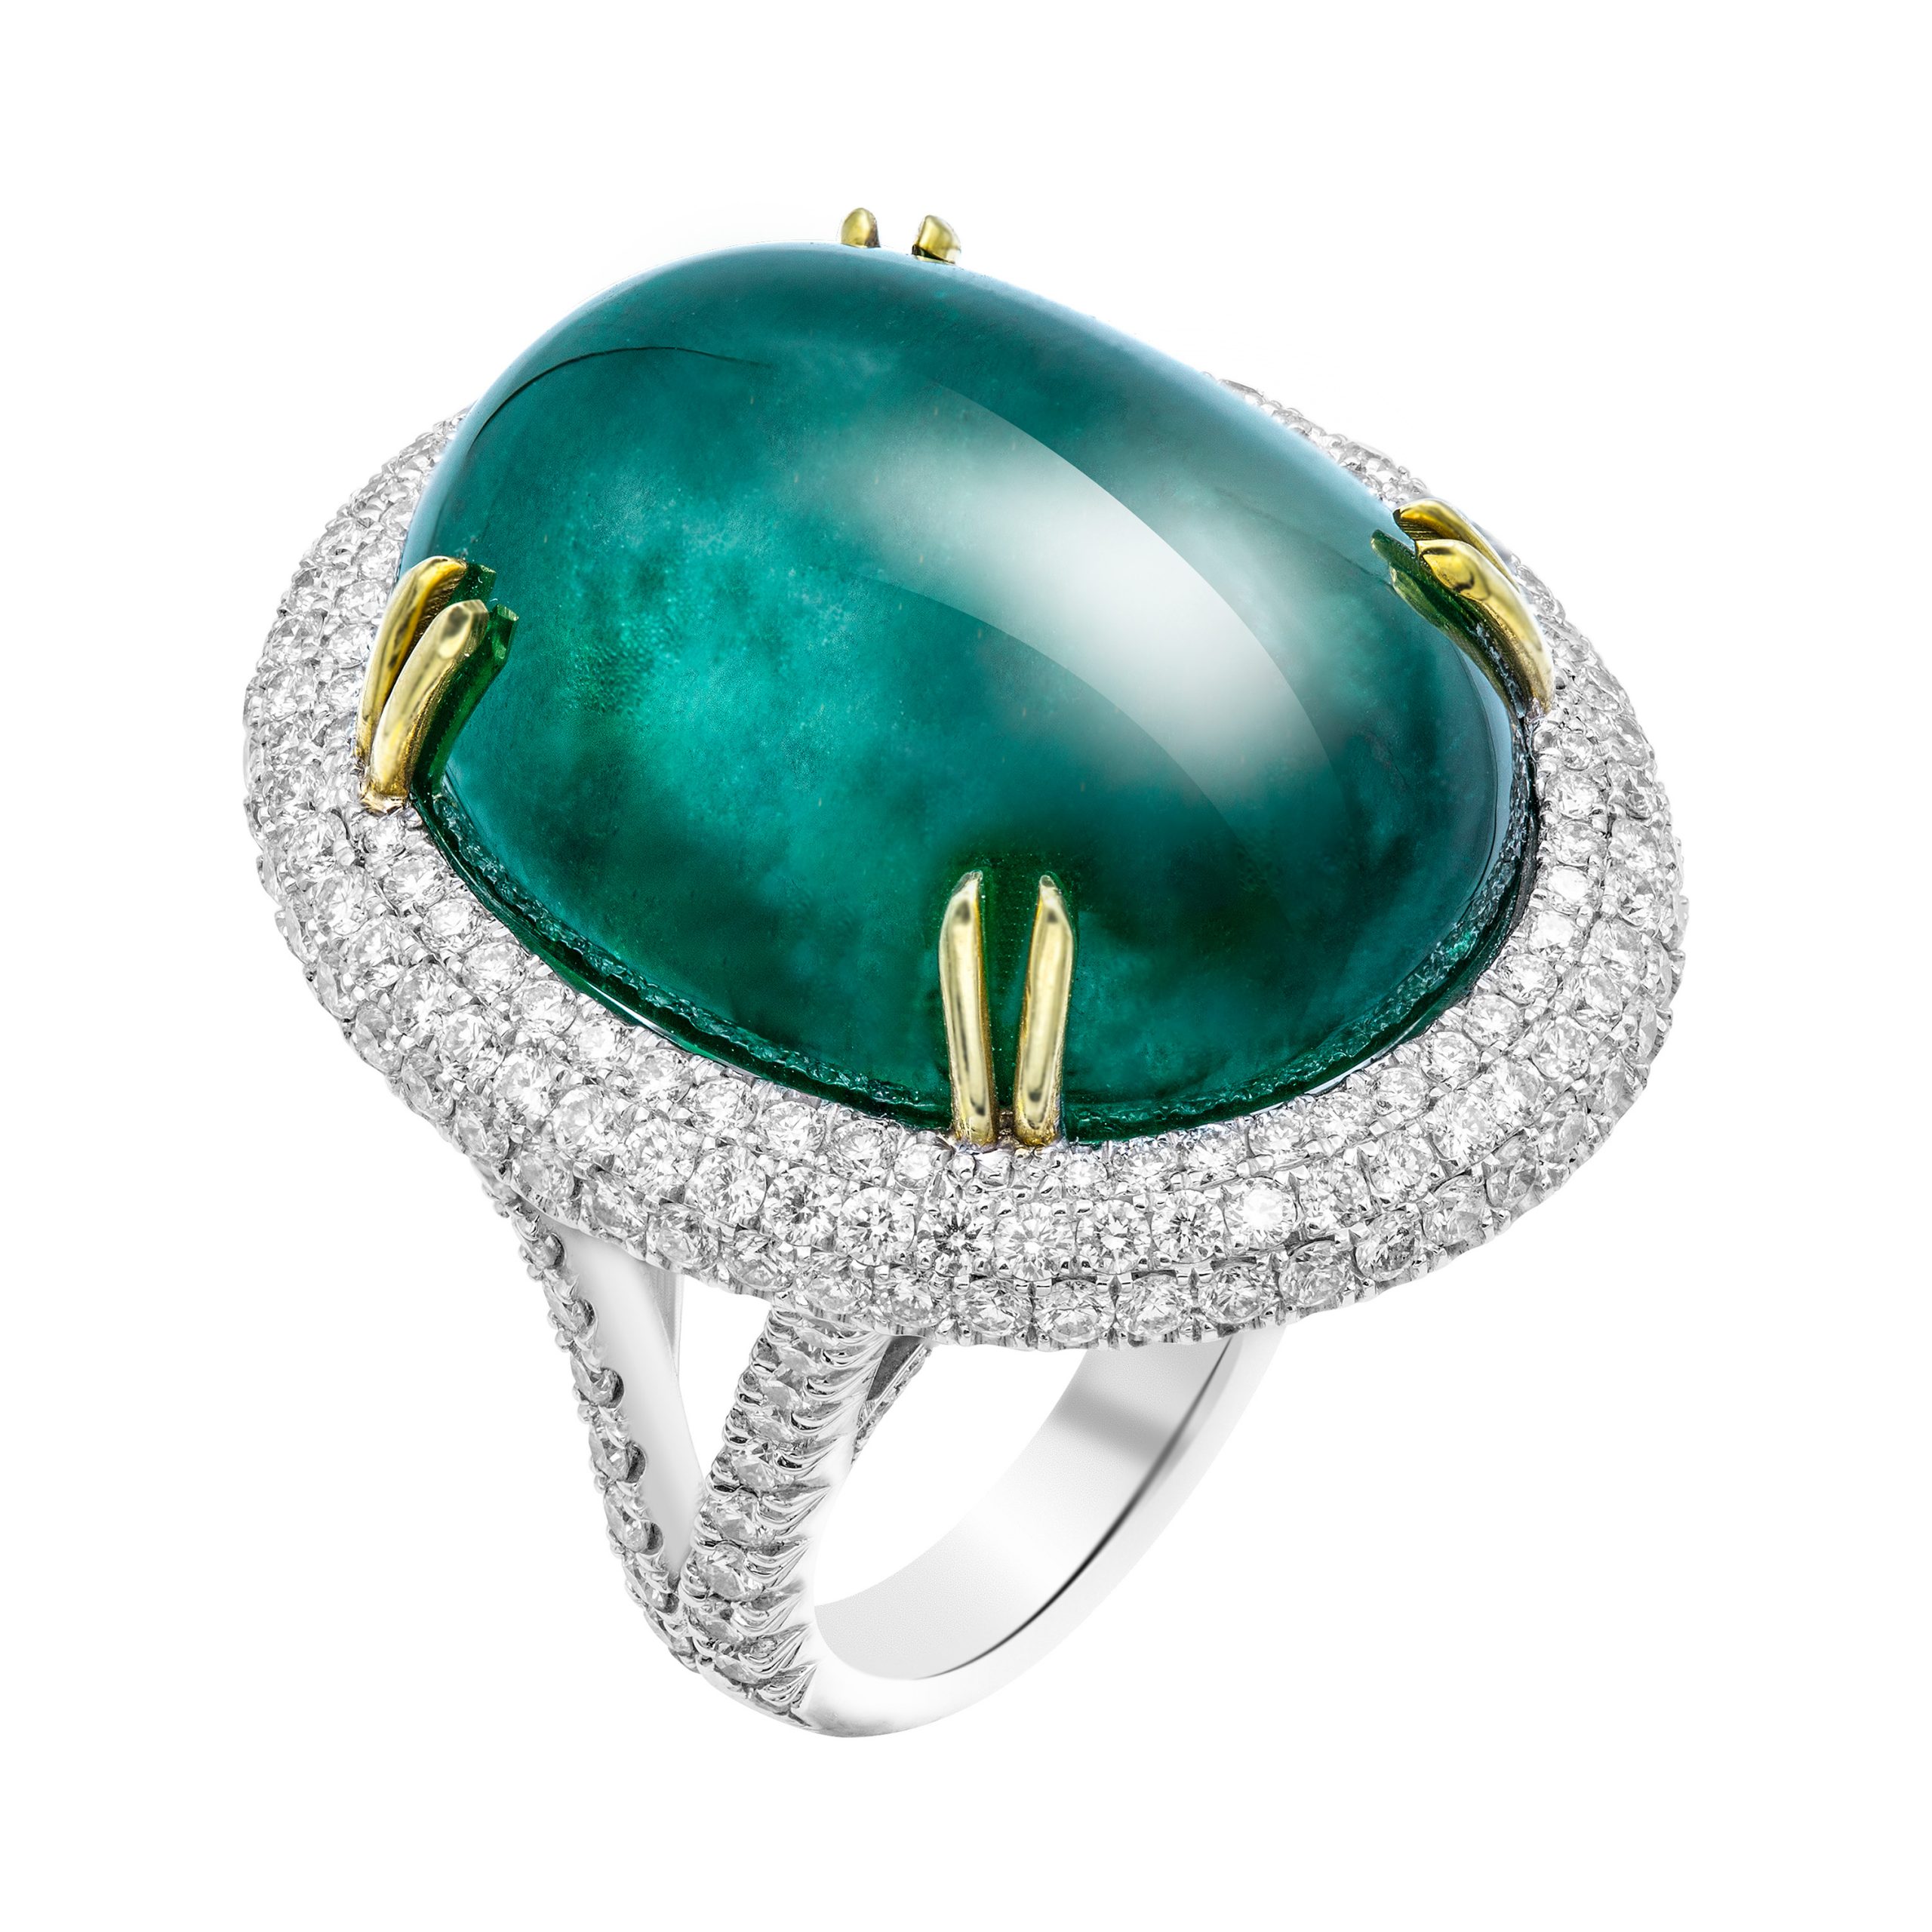 GIA Certified 50.6 Carat Oval Emerald Cabochon Diamond Cocktail Ring ...